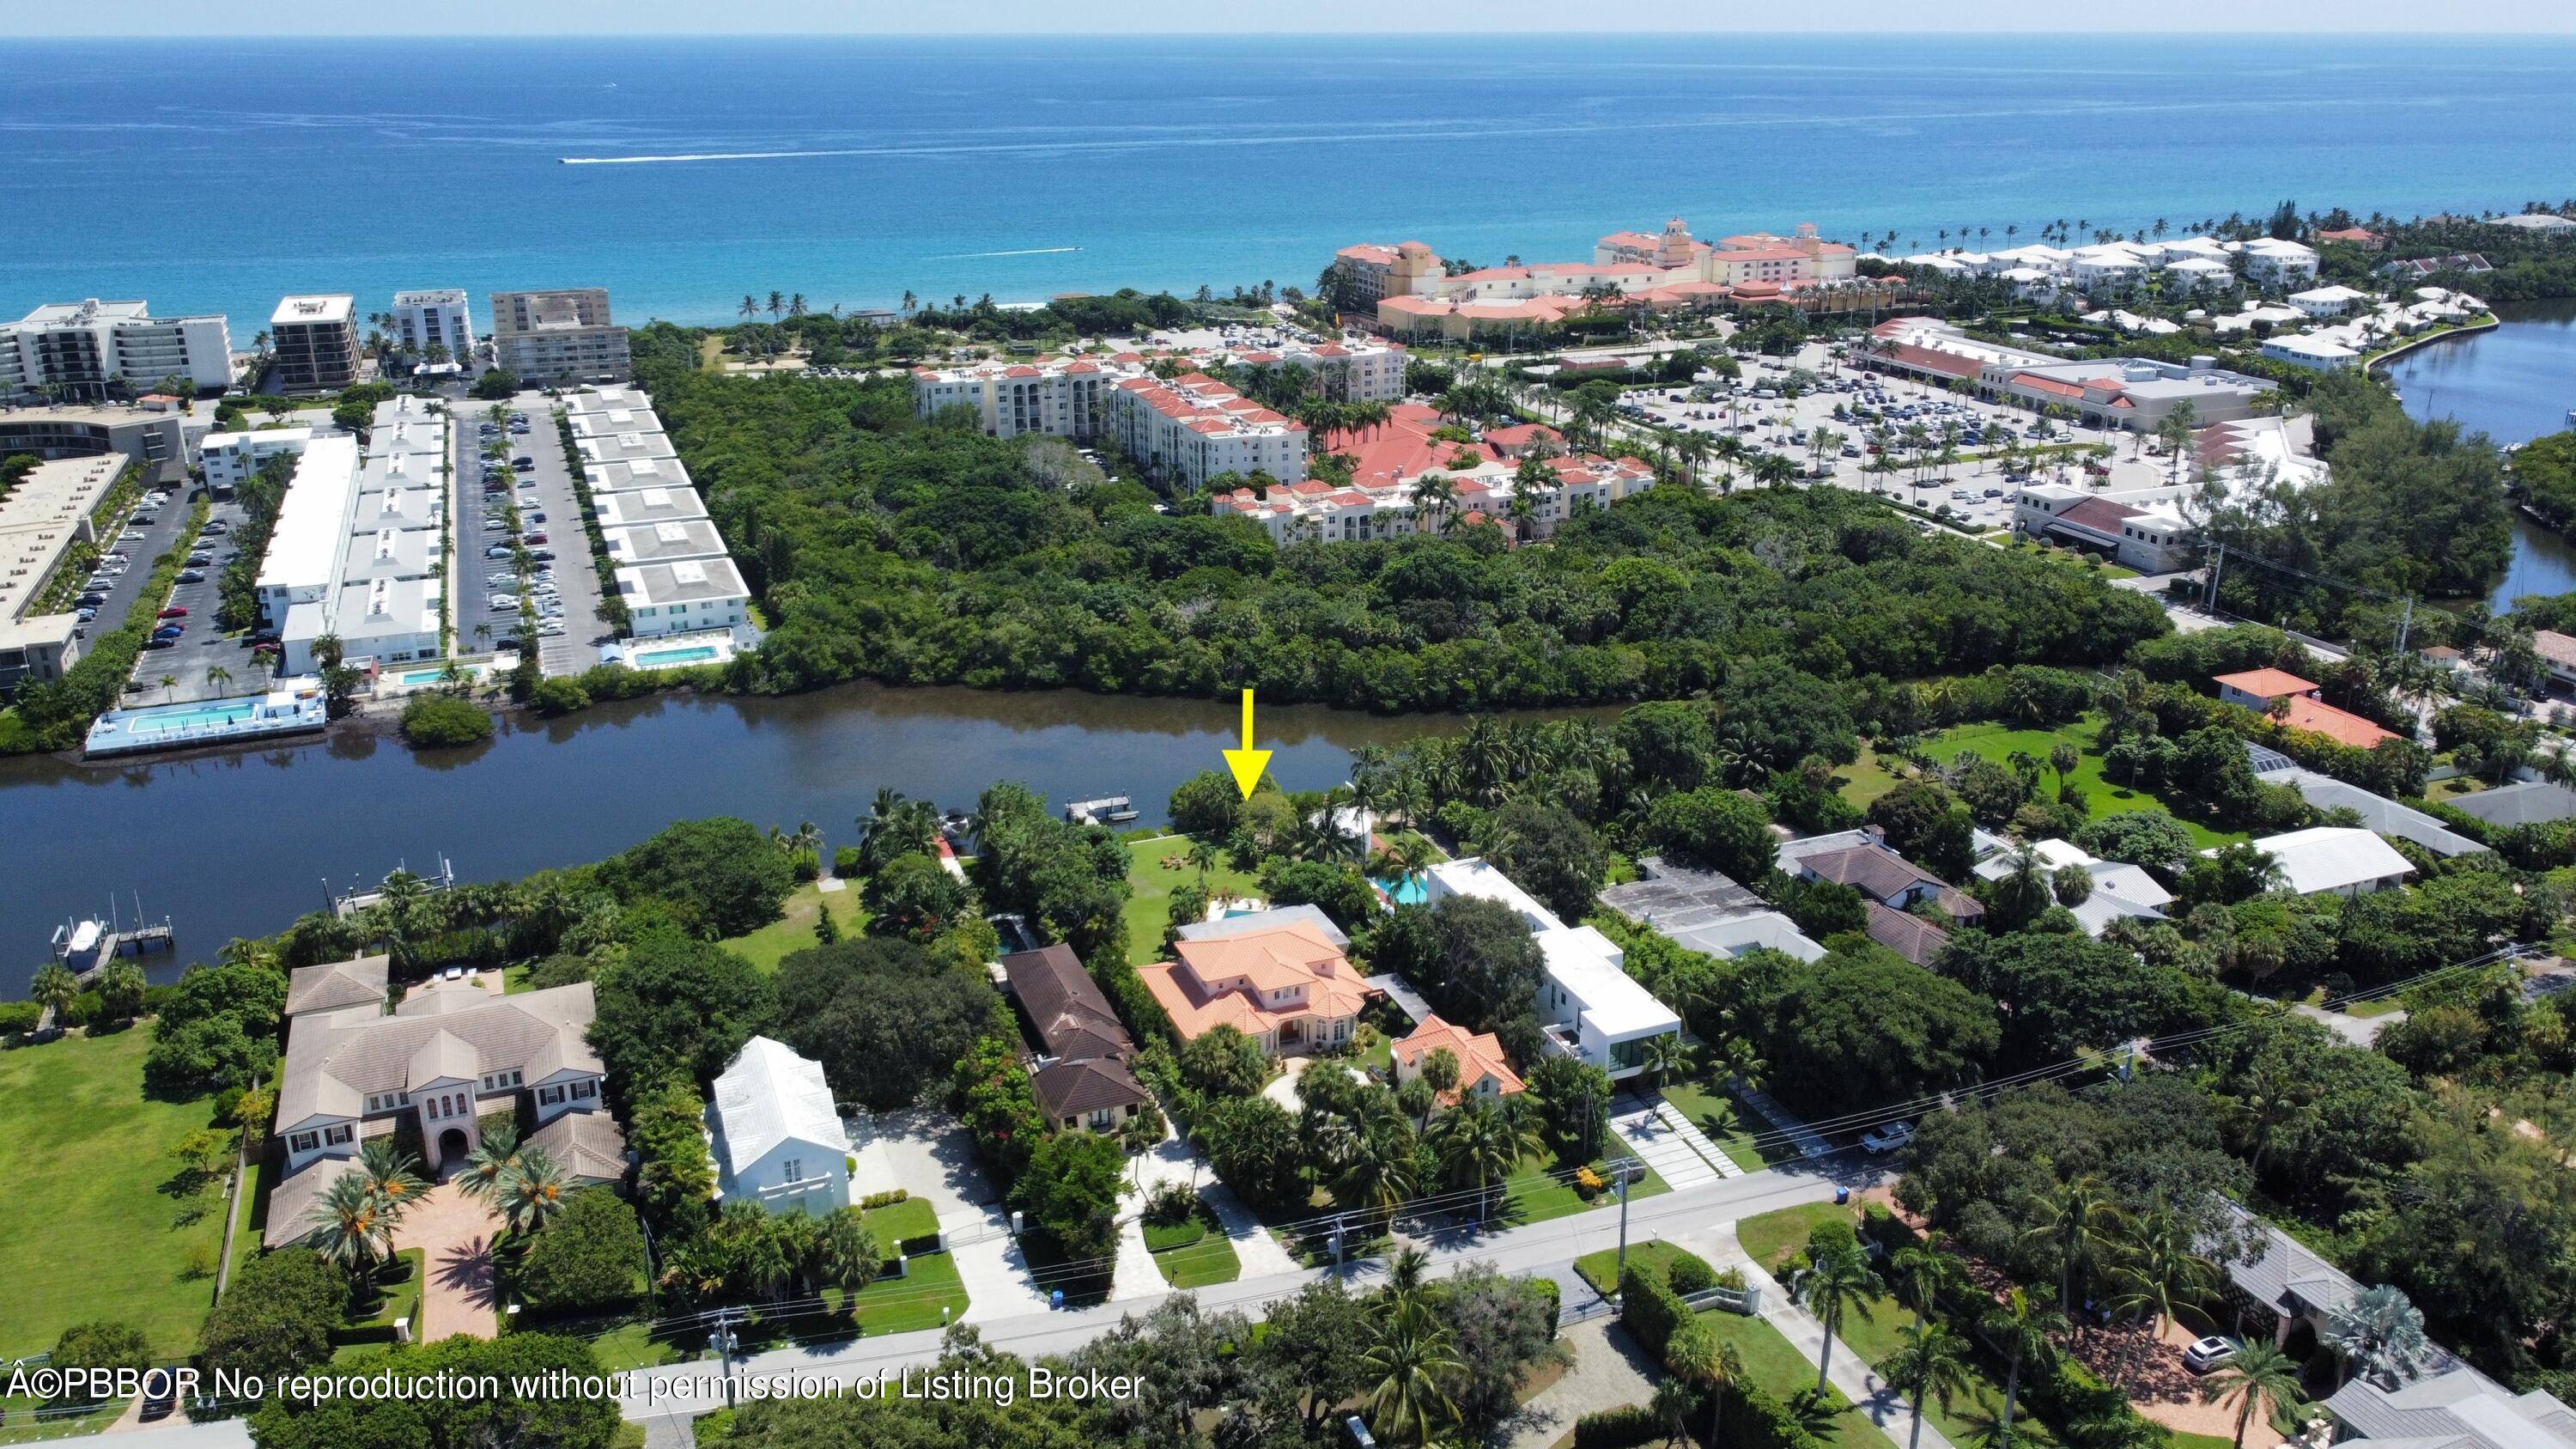 Enjoy peace, privacy, and the ocean breeze from this sprawling 5 bedroom waterfront estate.